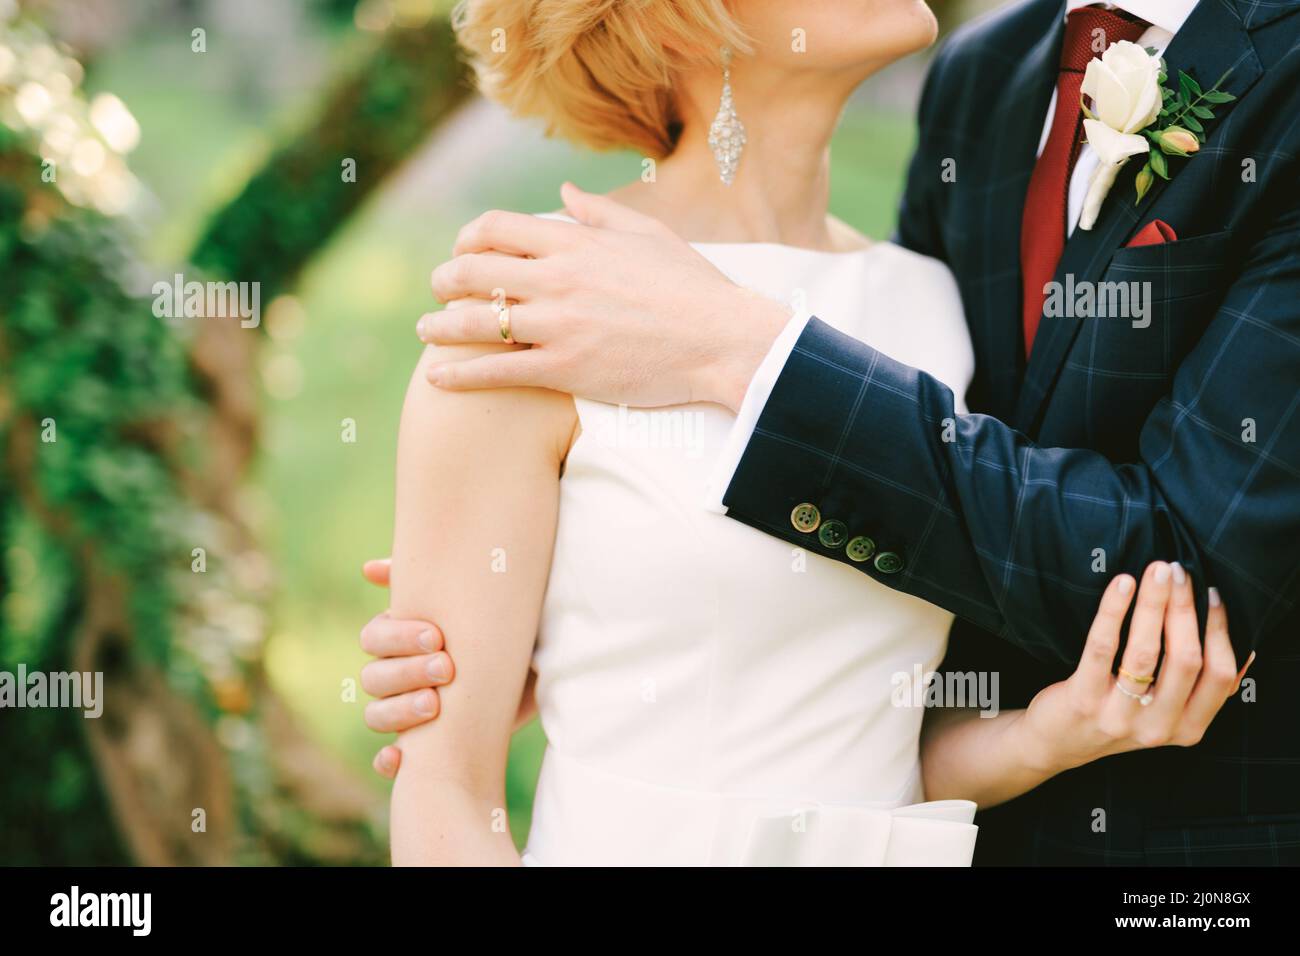 Groom in a blue checkered suit hugs bride in a white dress in the park against the background of a green tree entwined with ivy. Stock Photo